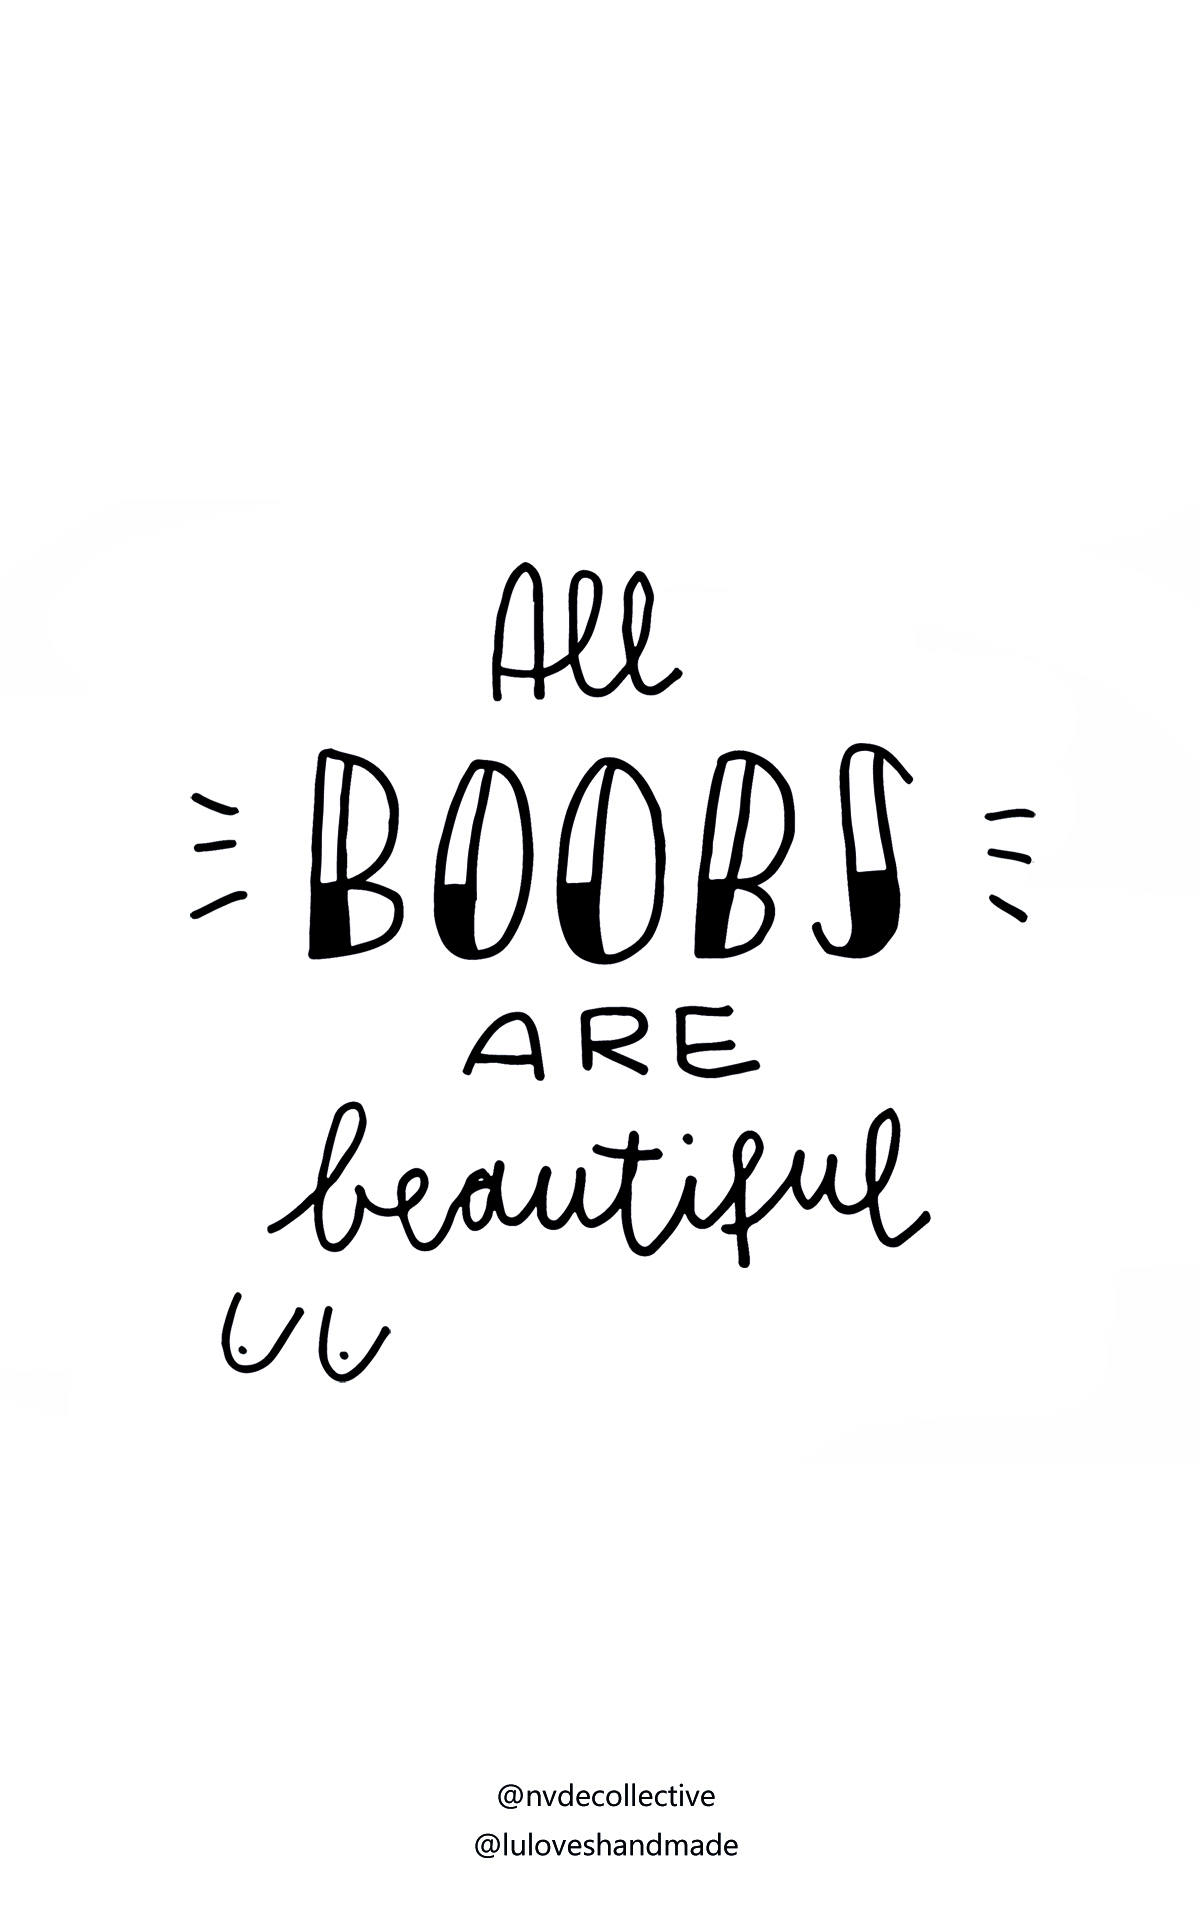 All boobs are beautiful